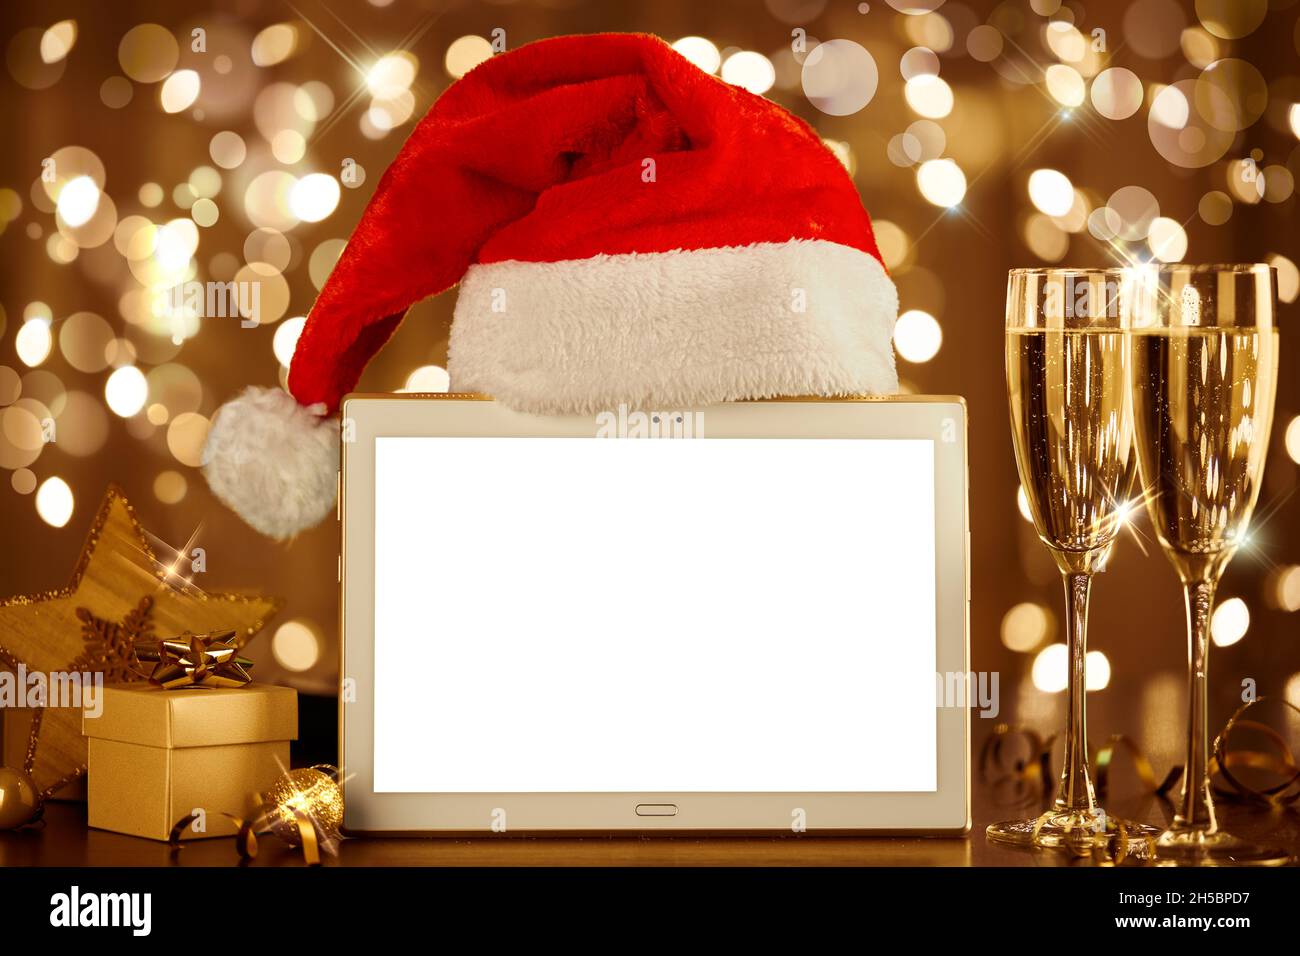 Christmas mockup. Blank tablet and Santa hat on blurred background of winter holiday. Stock Photo